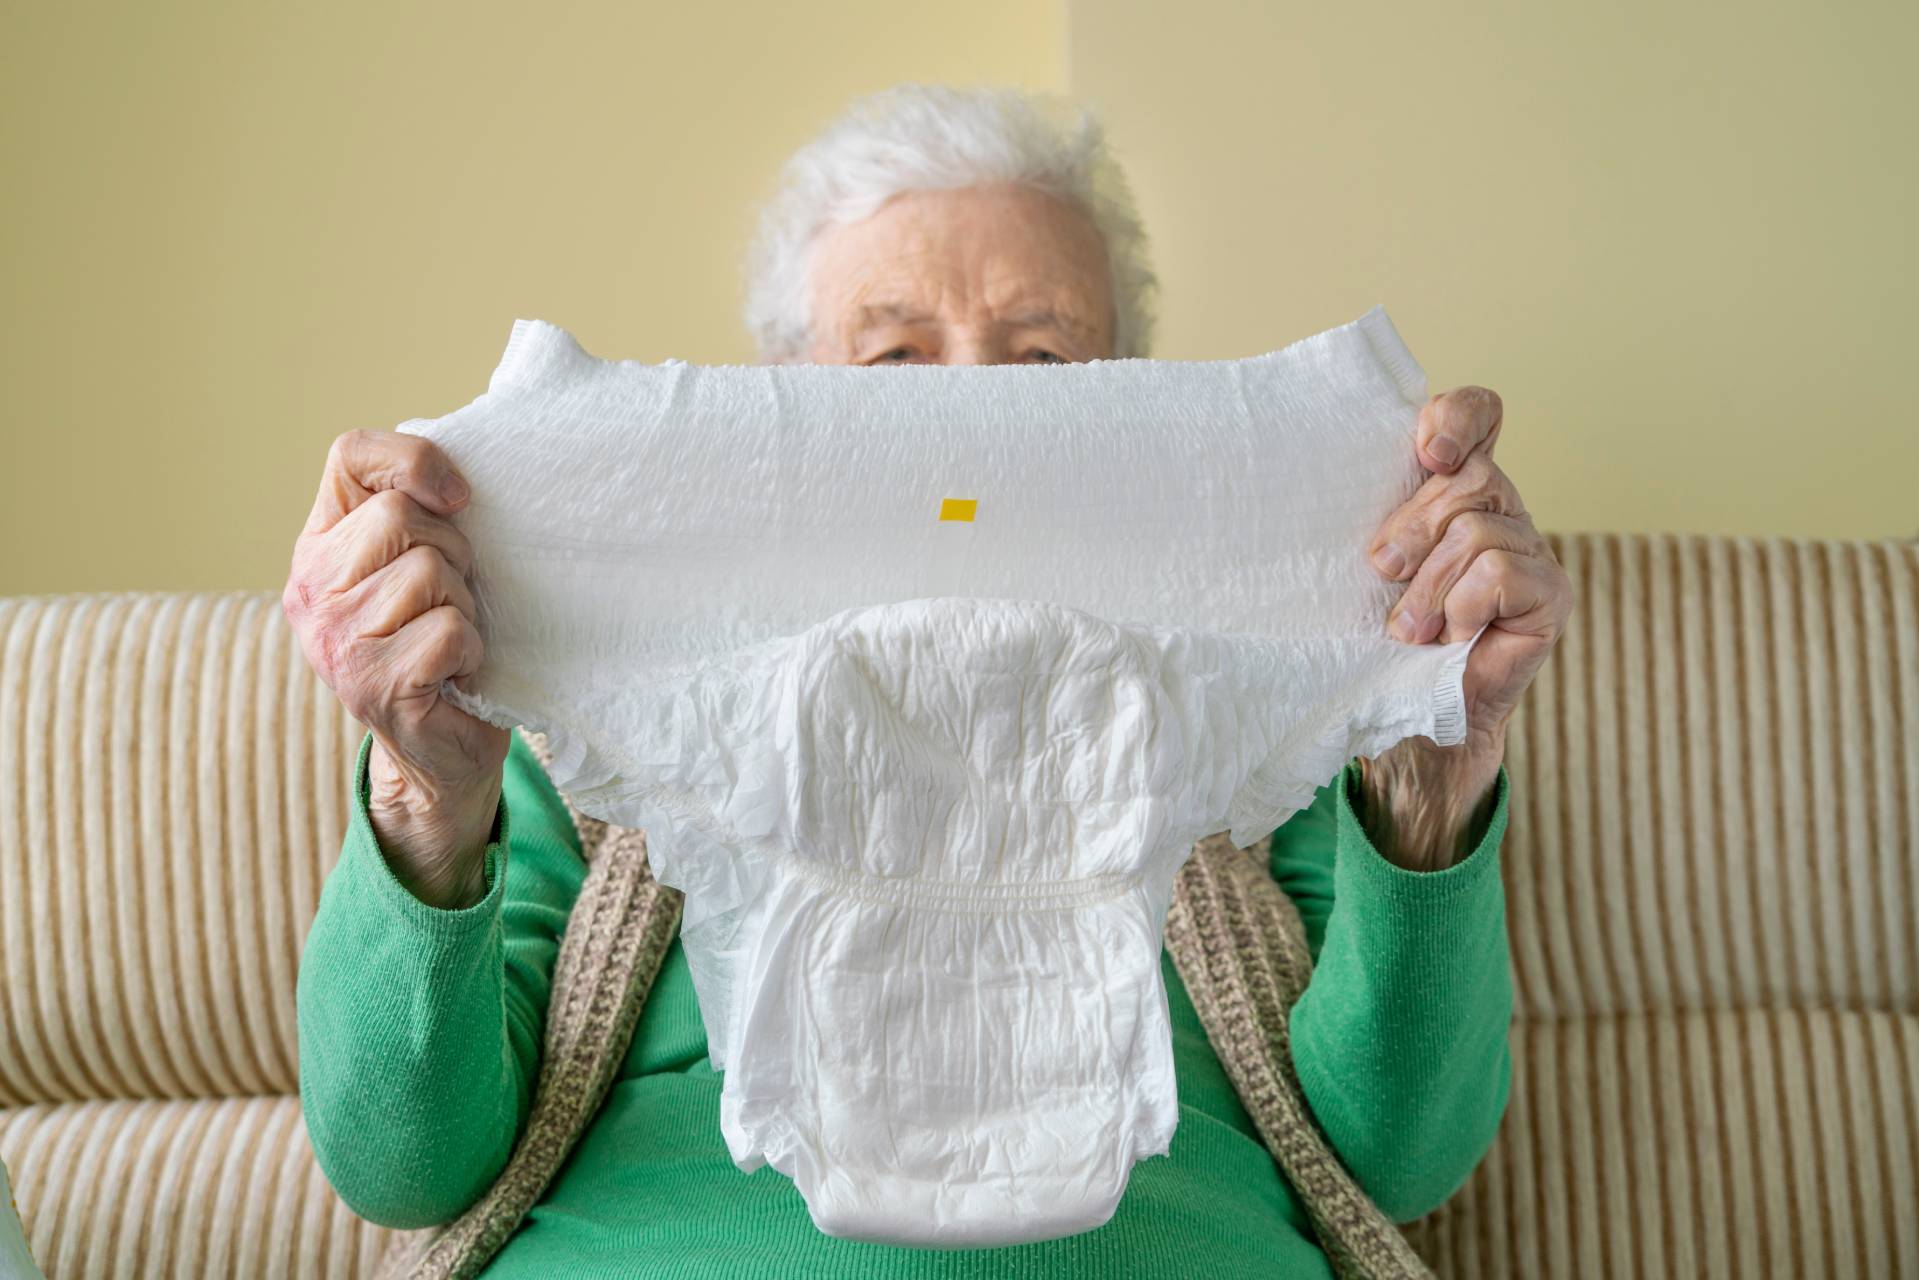 Adult Diapers Usage Guide